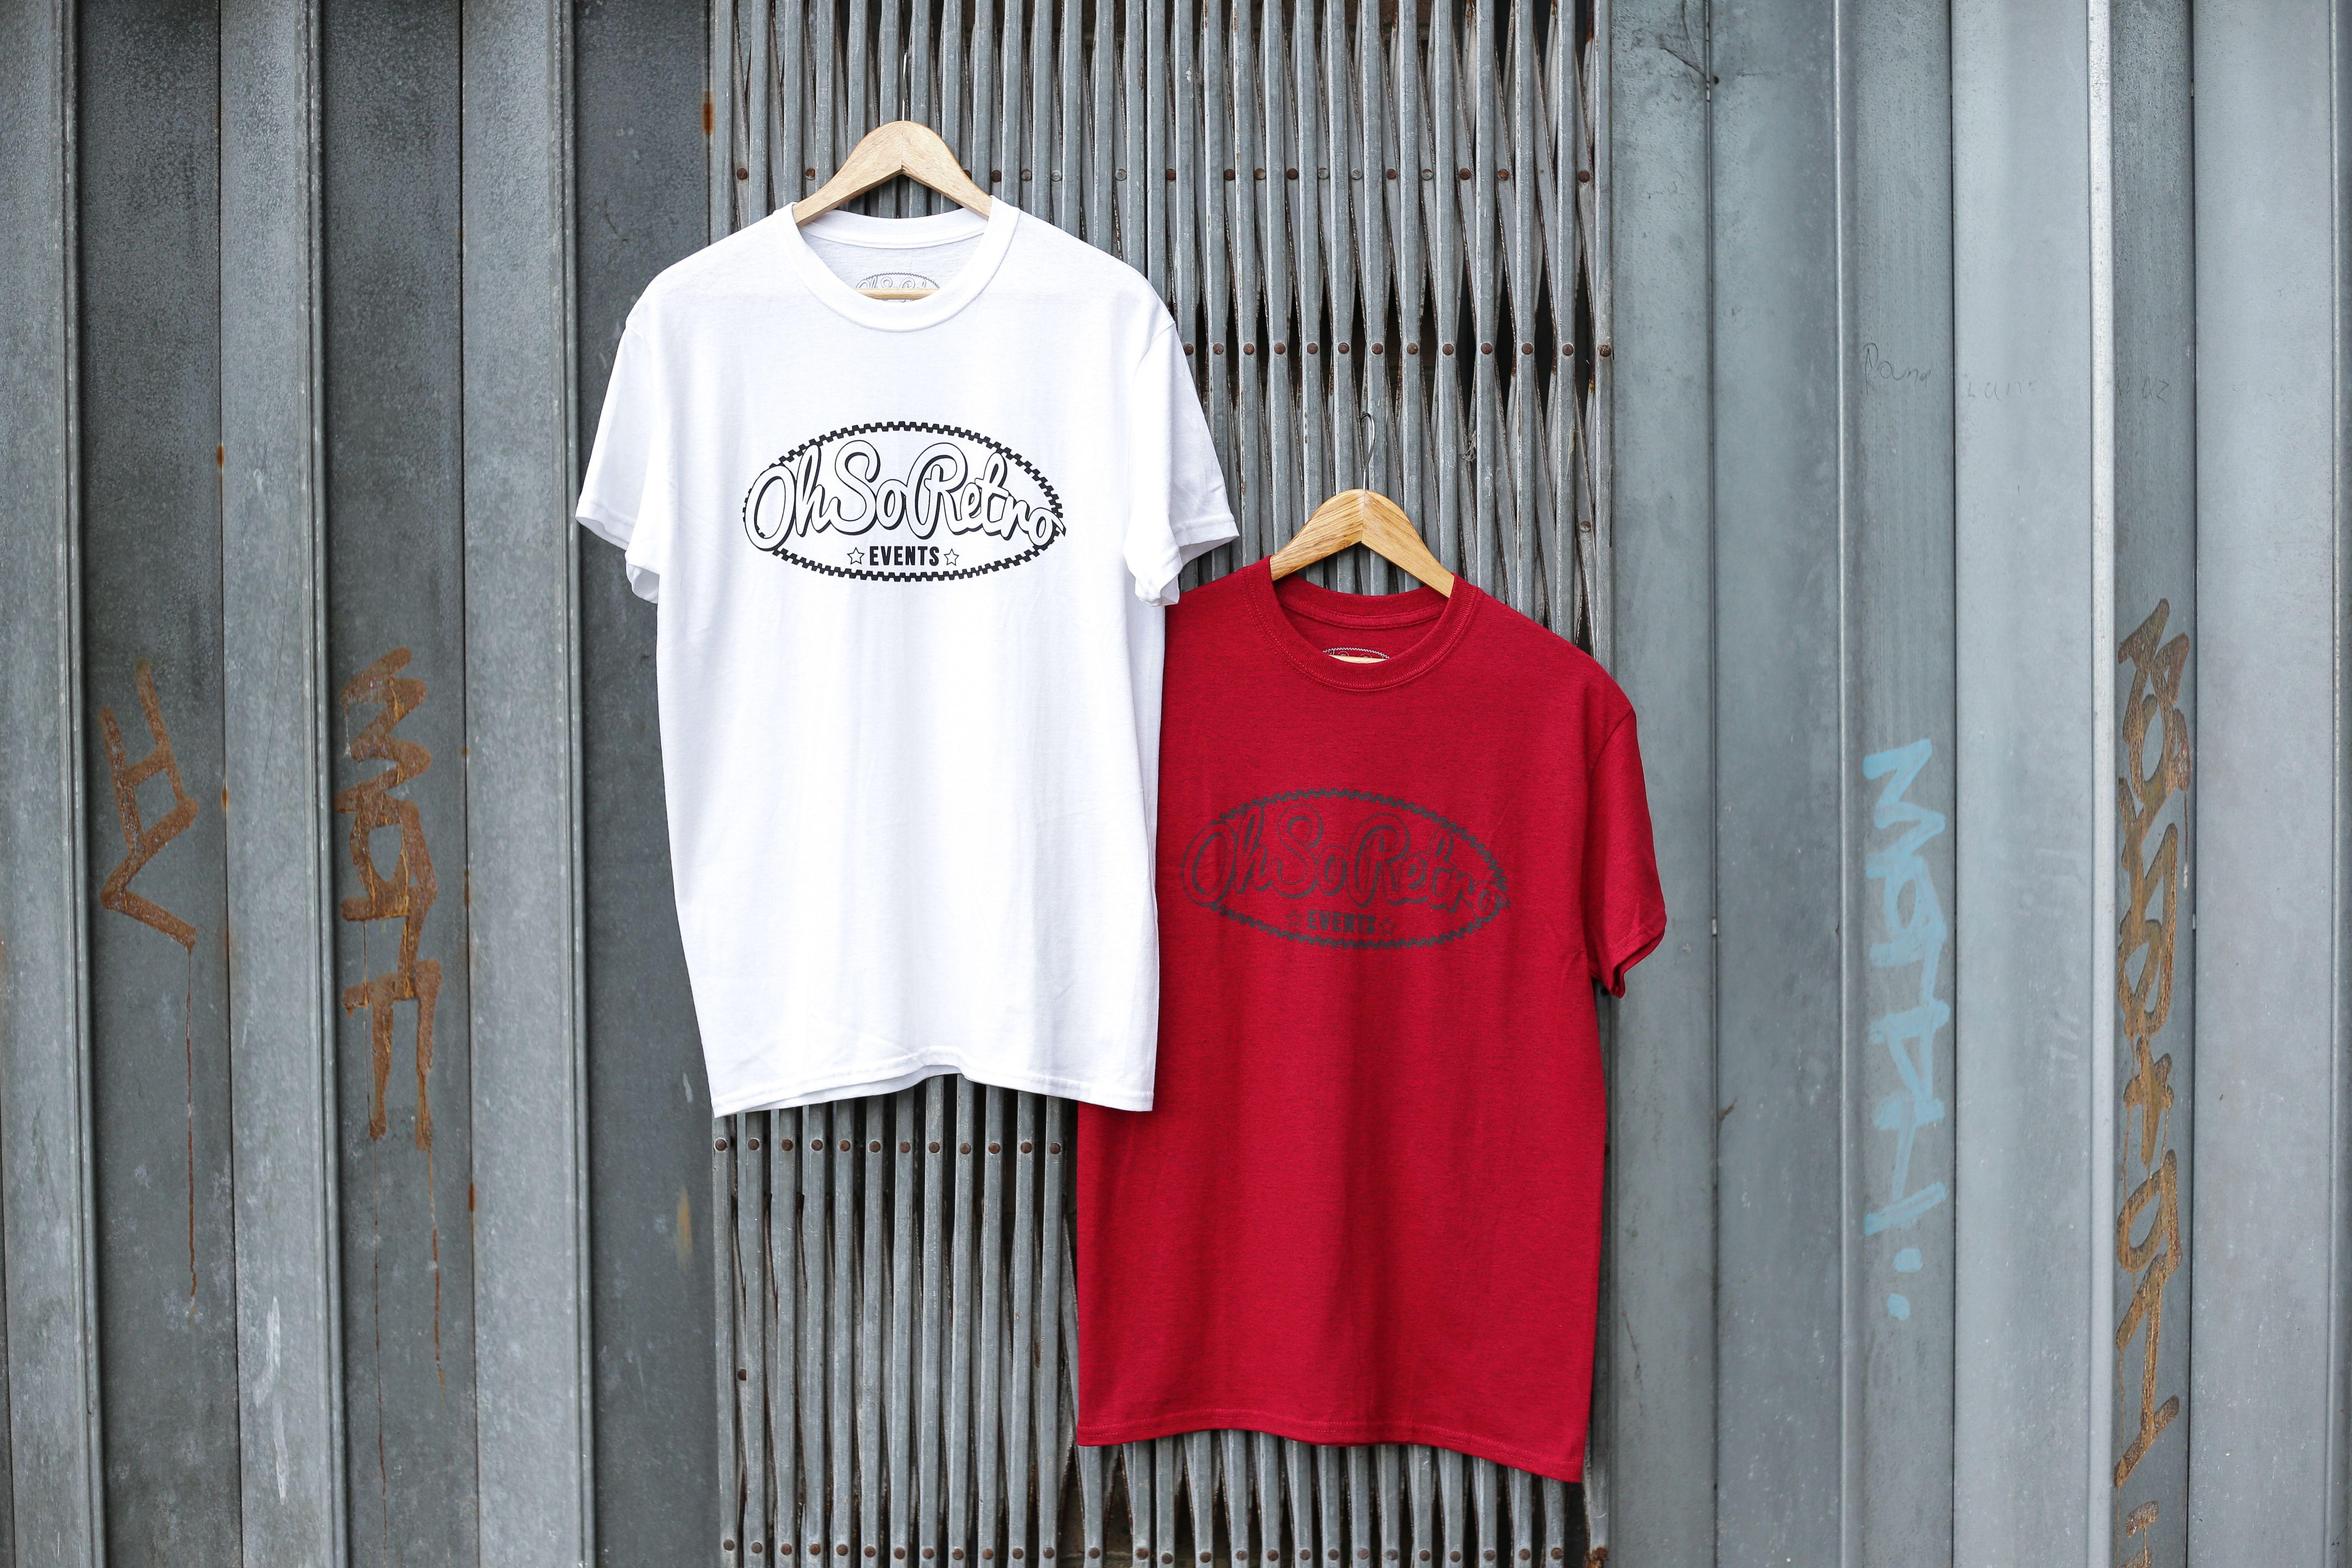 Black and Red Oval Logo - Antique Red with Black Oval Logo Tshirt - OhSoRetro Events